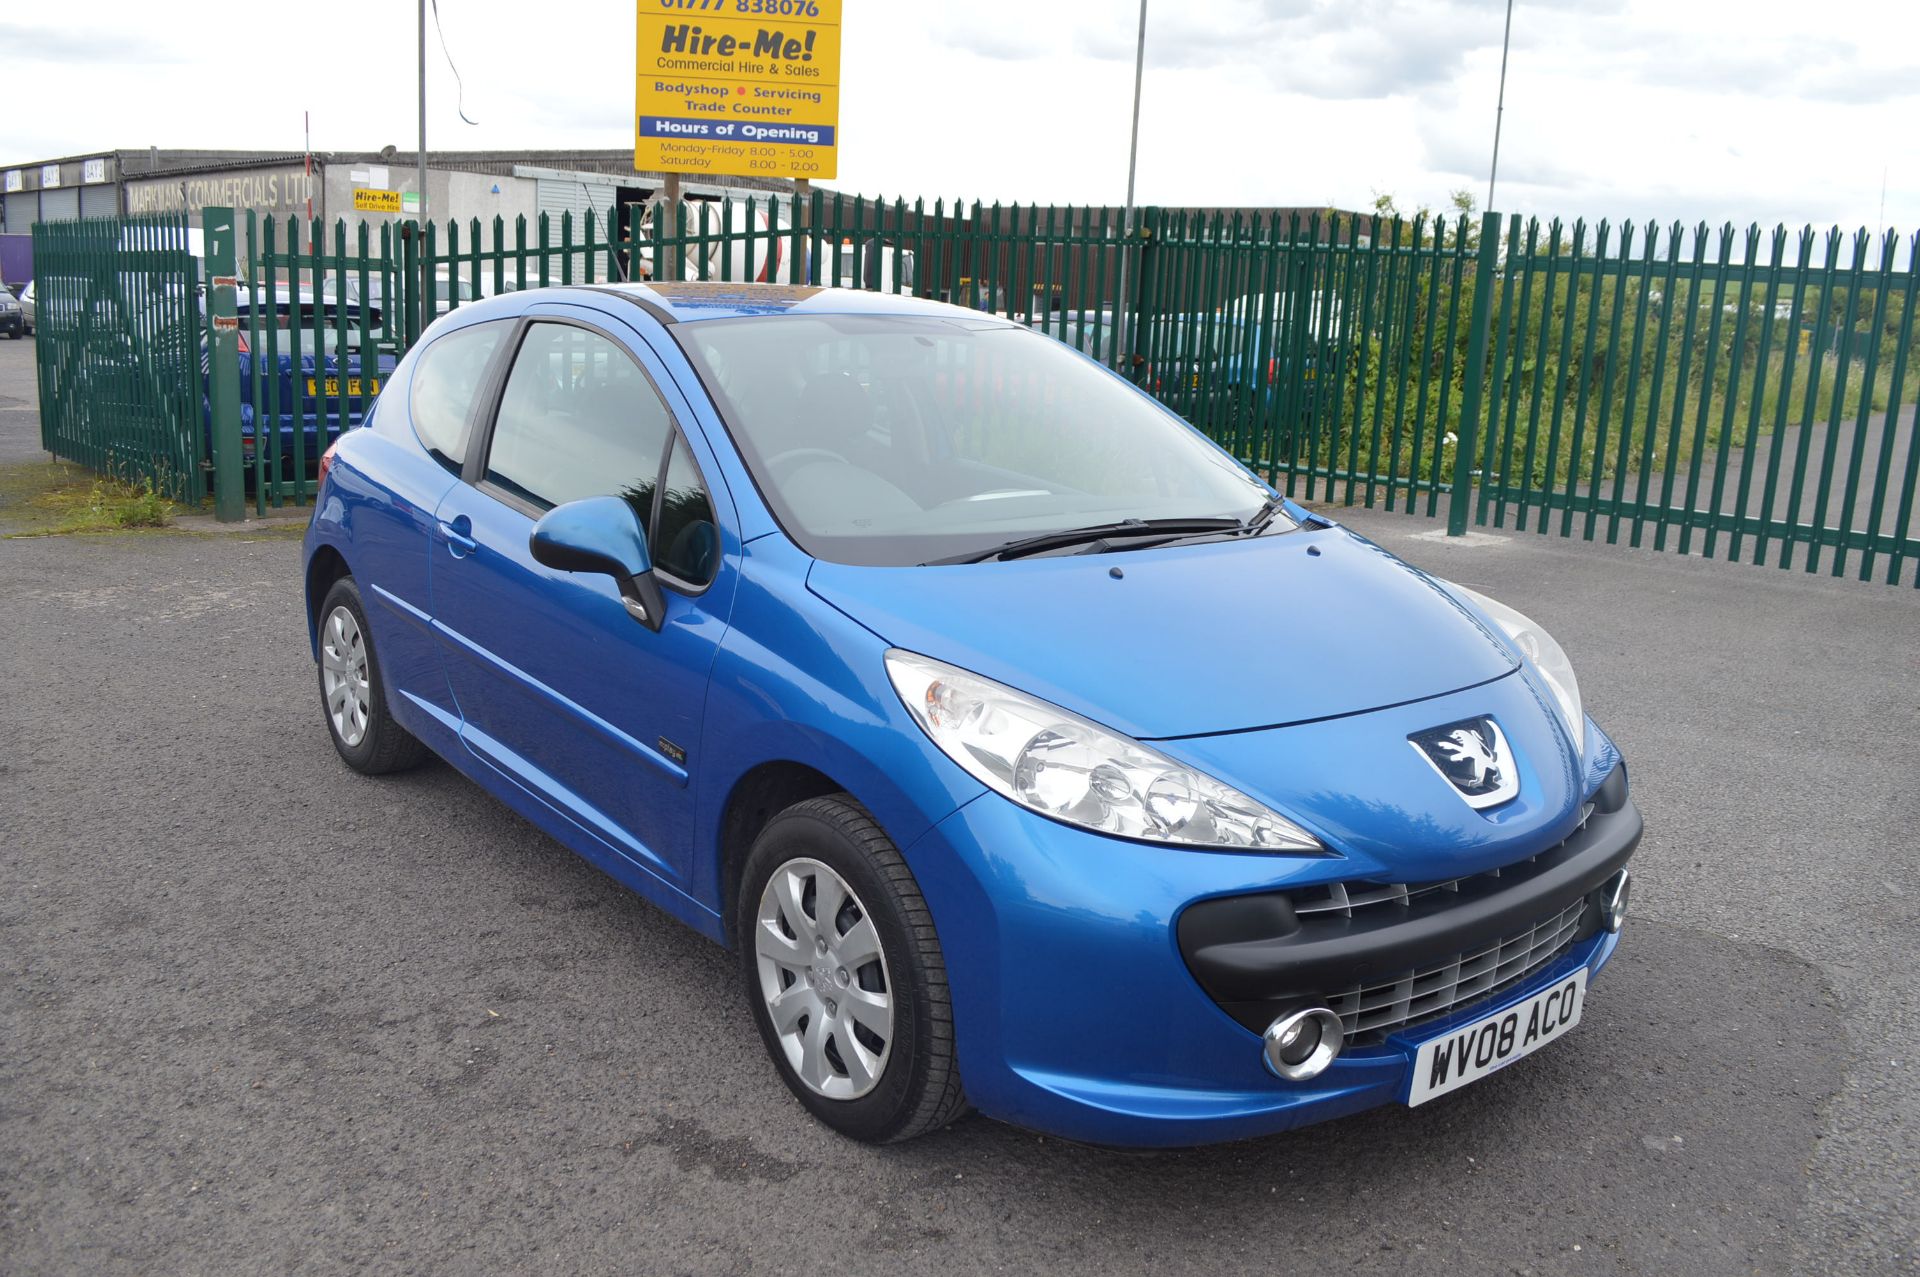 2008/08 REG PEUGEOT 207 M:PLAY, AIR CON, LONG MOT* WITH VALUER'S REPORT*